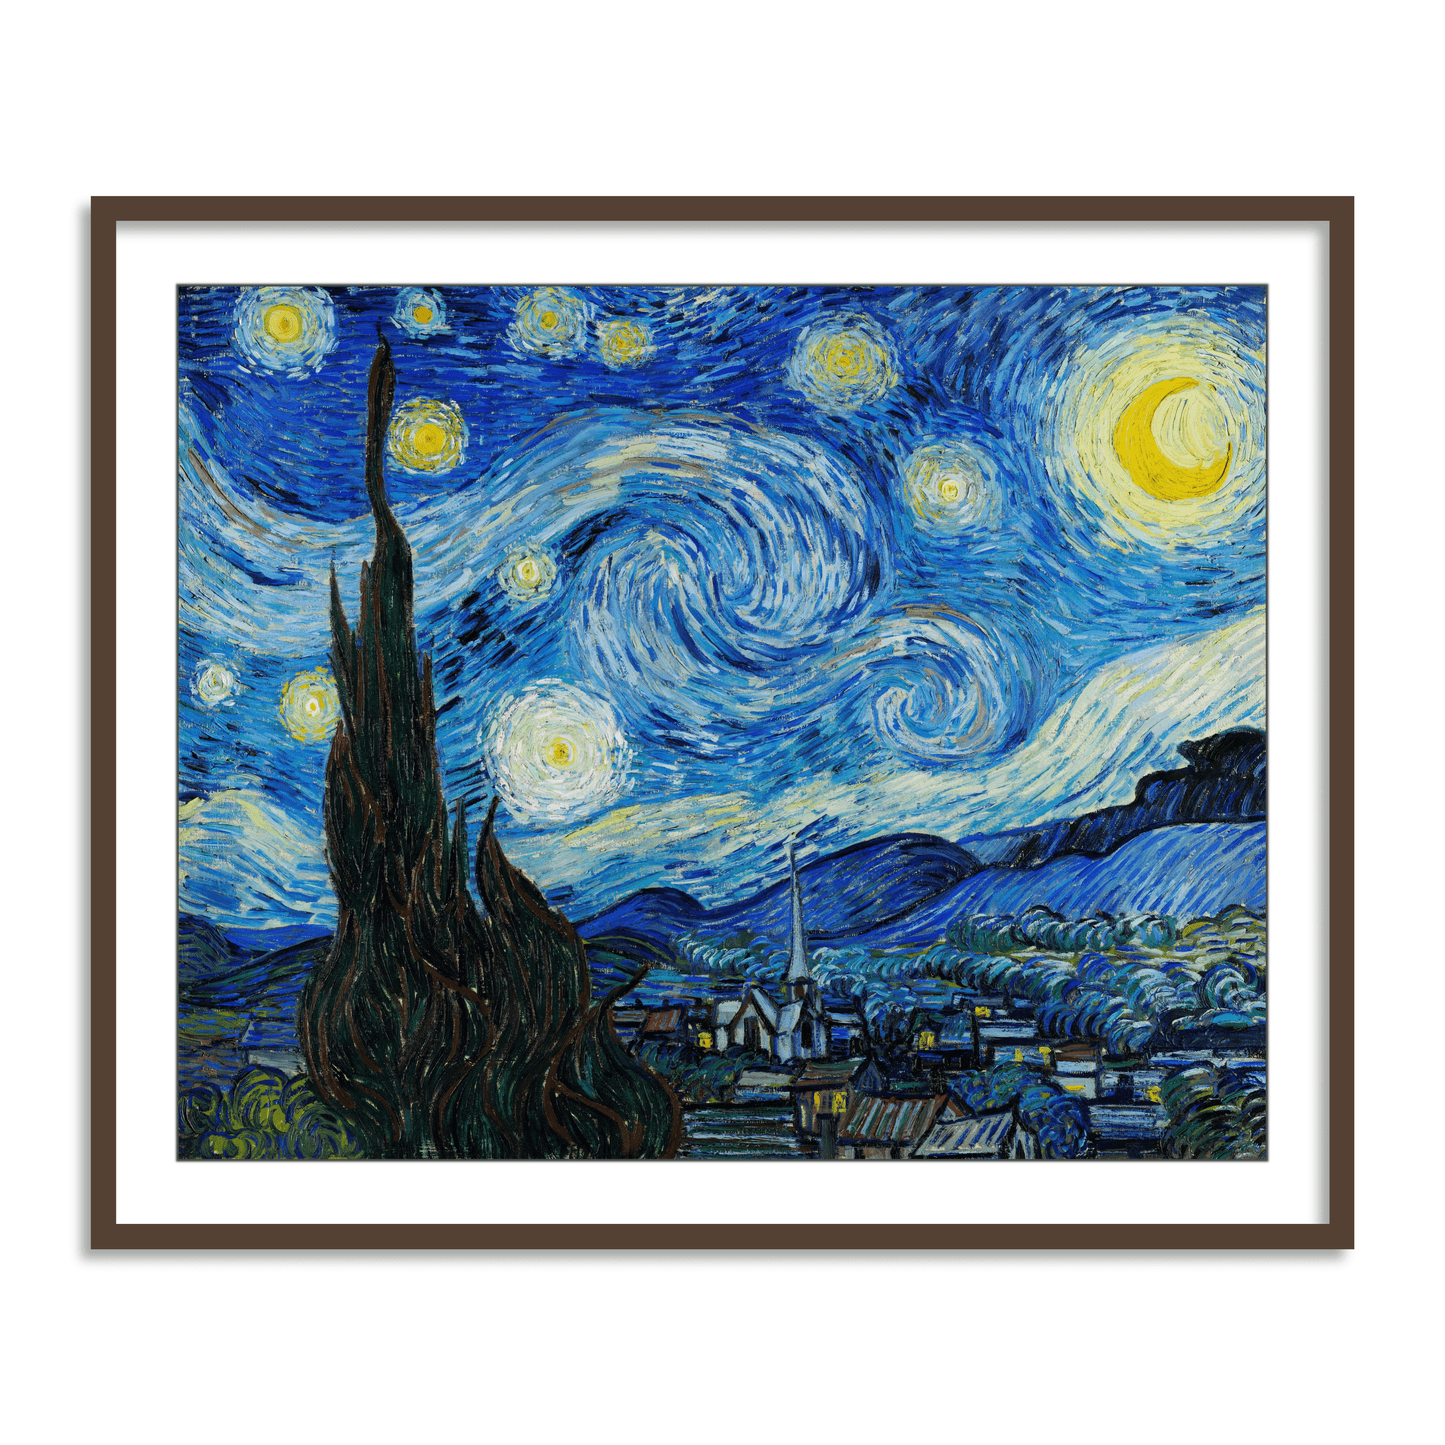 The Starry Night by Vincent Van Gogh Famous Painting Wall Art